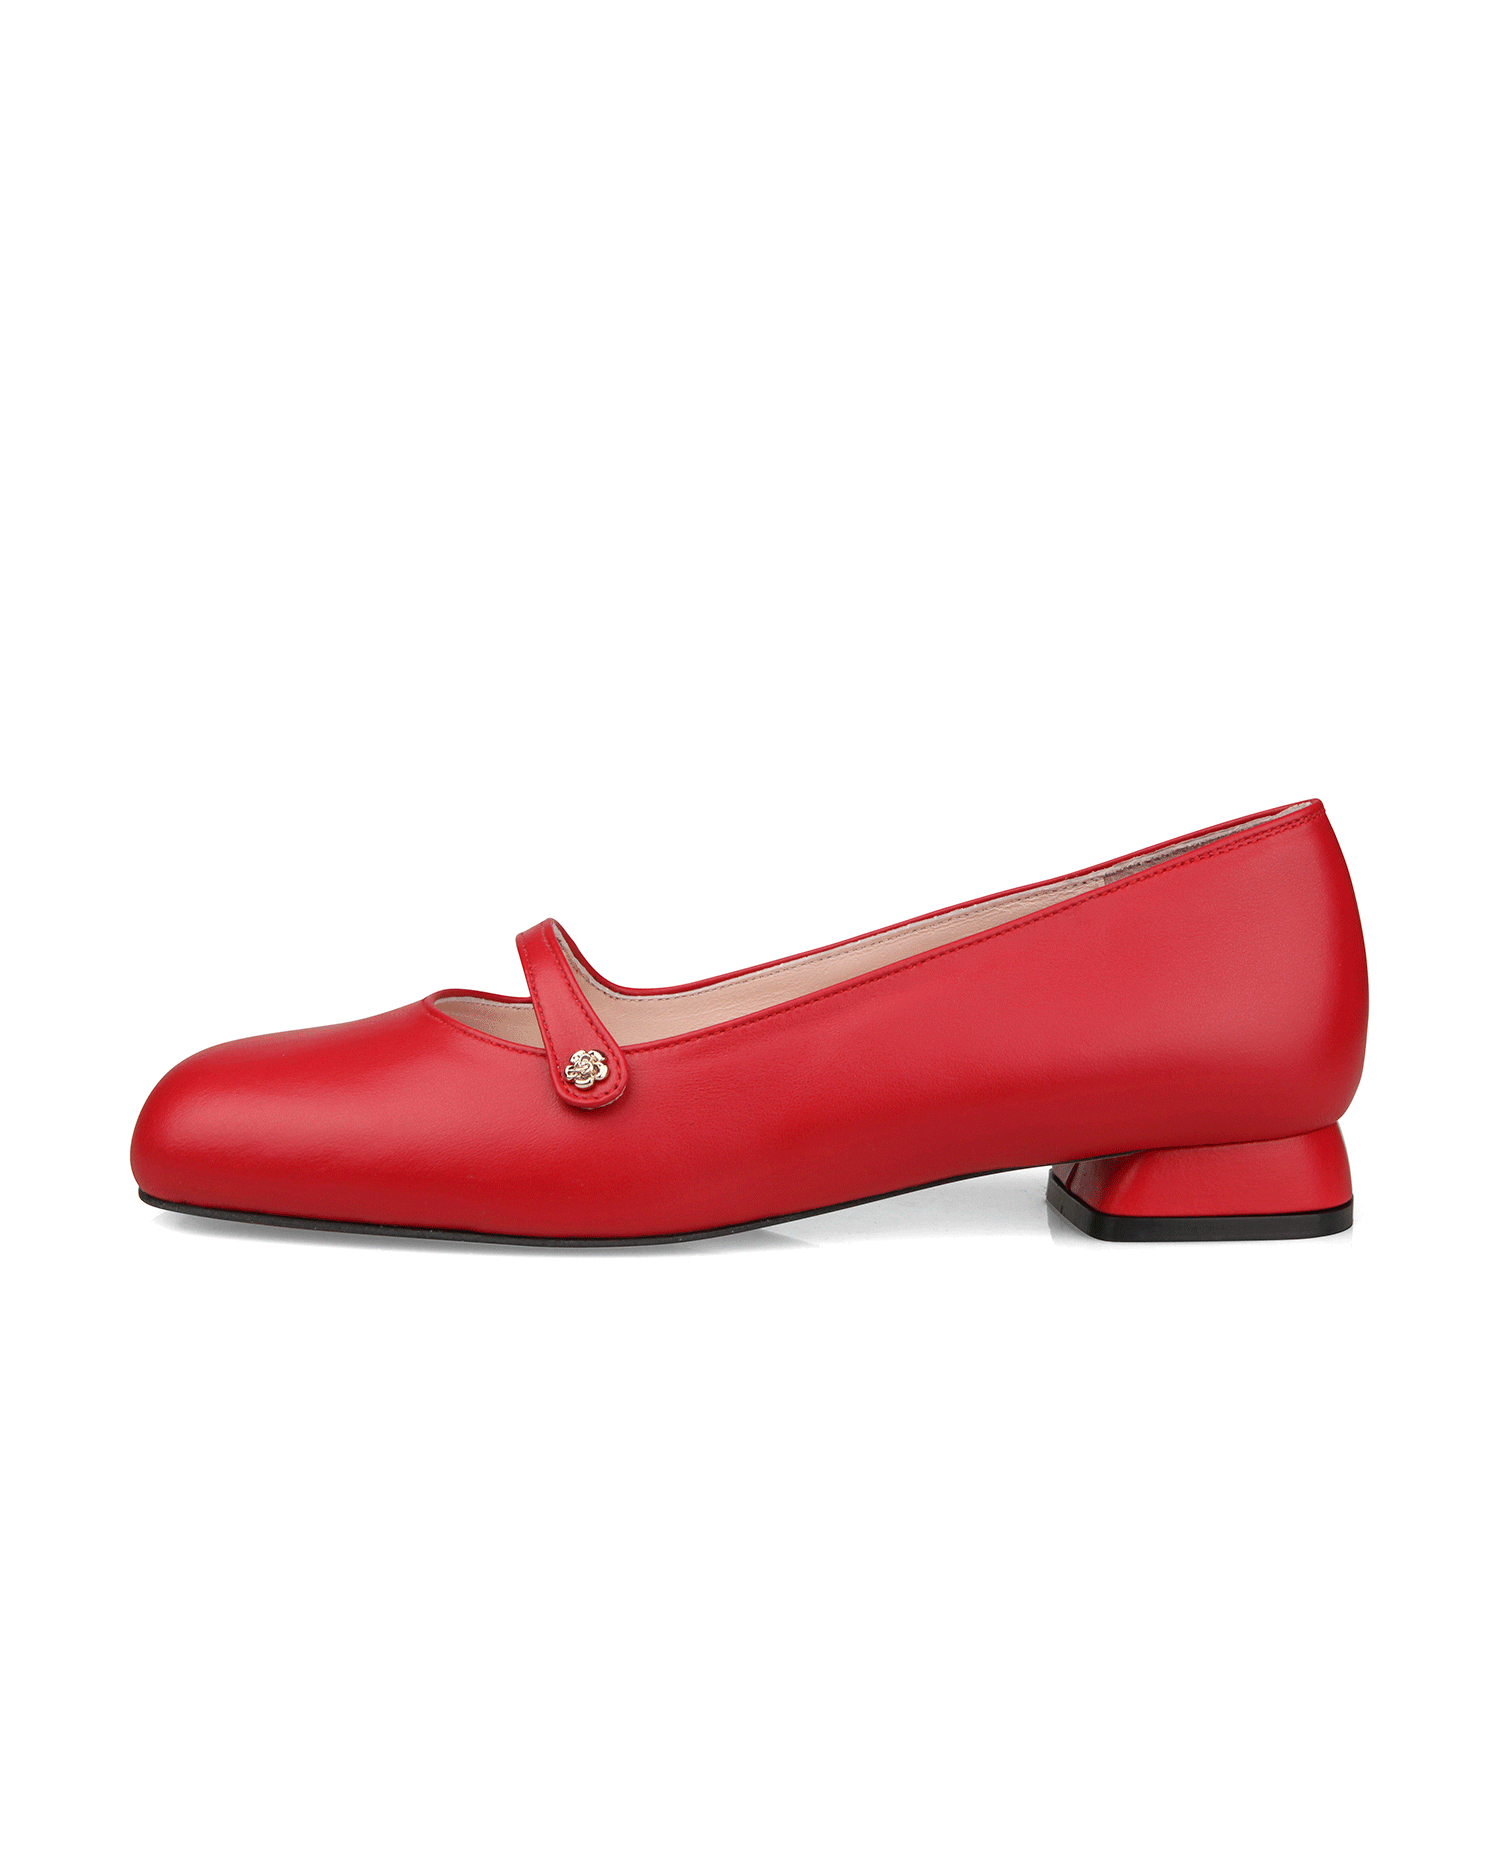 Jane with a flower, Flats - Red